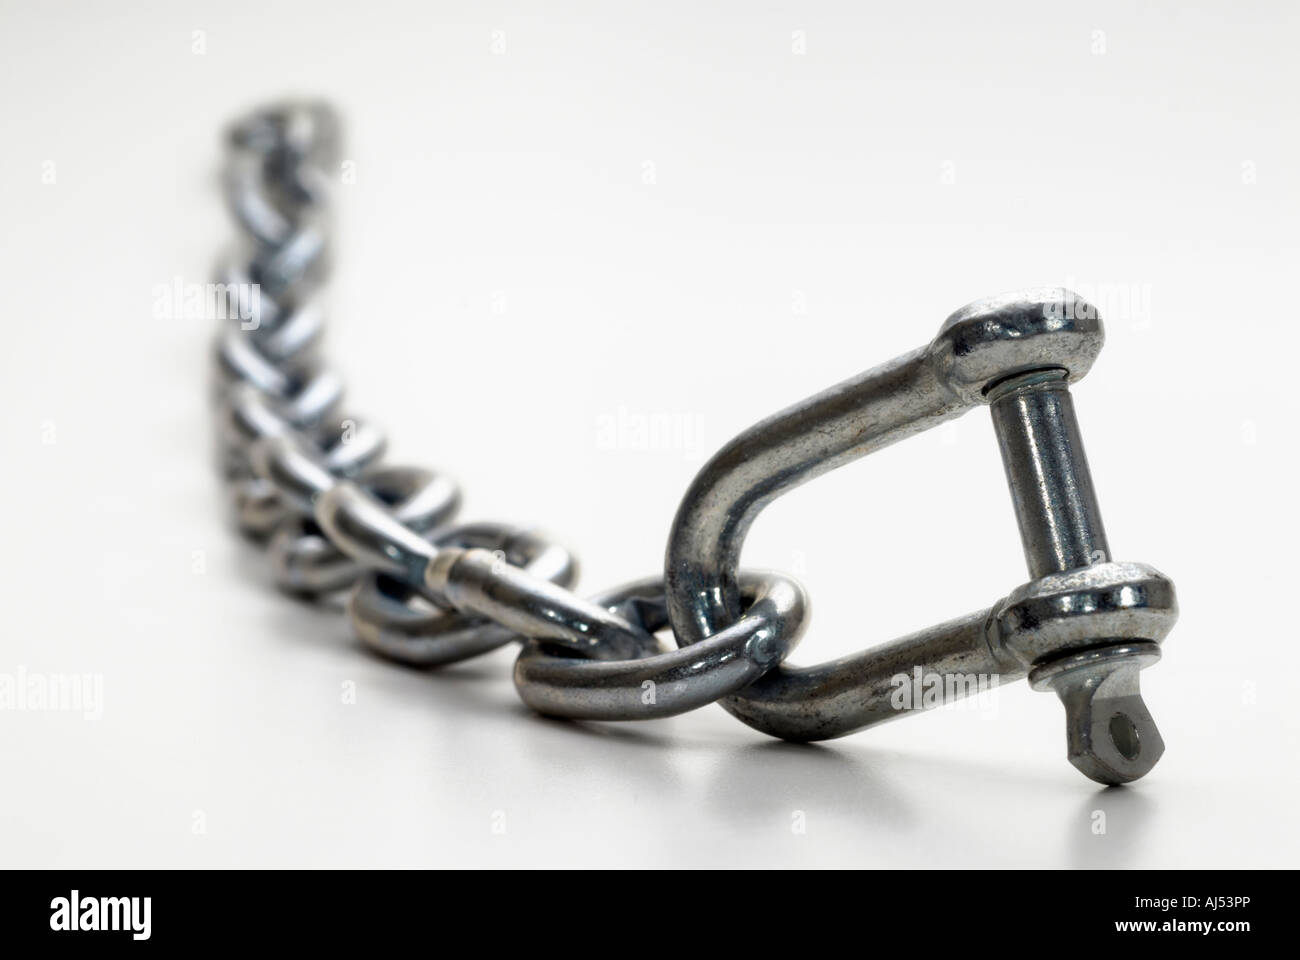 Chain and 8mm 'Steel Shackle' Stock Photo